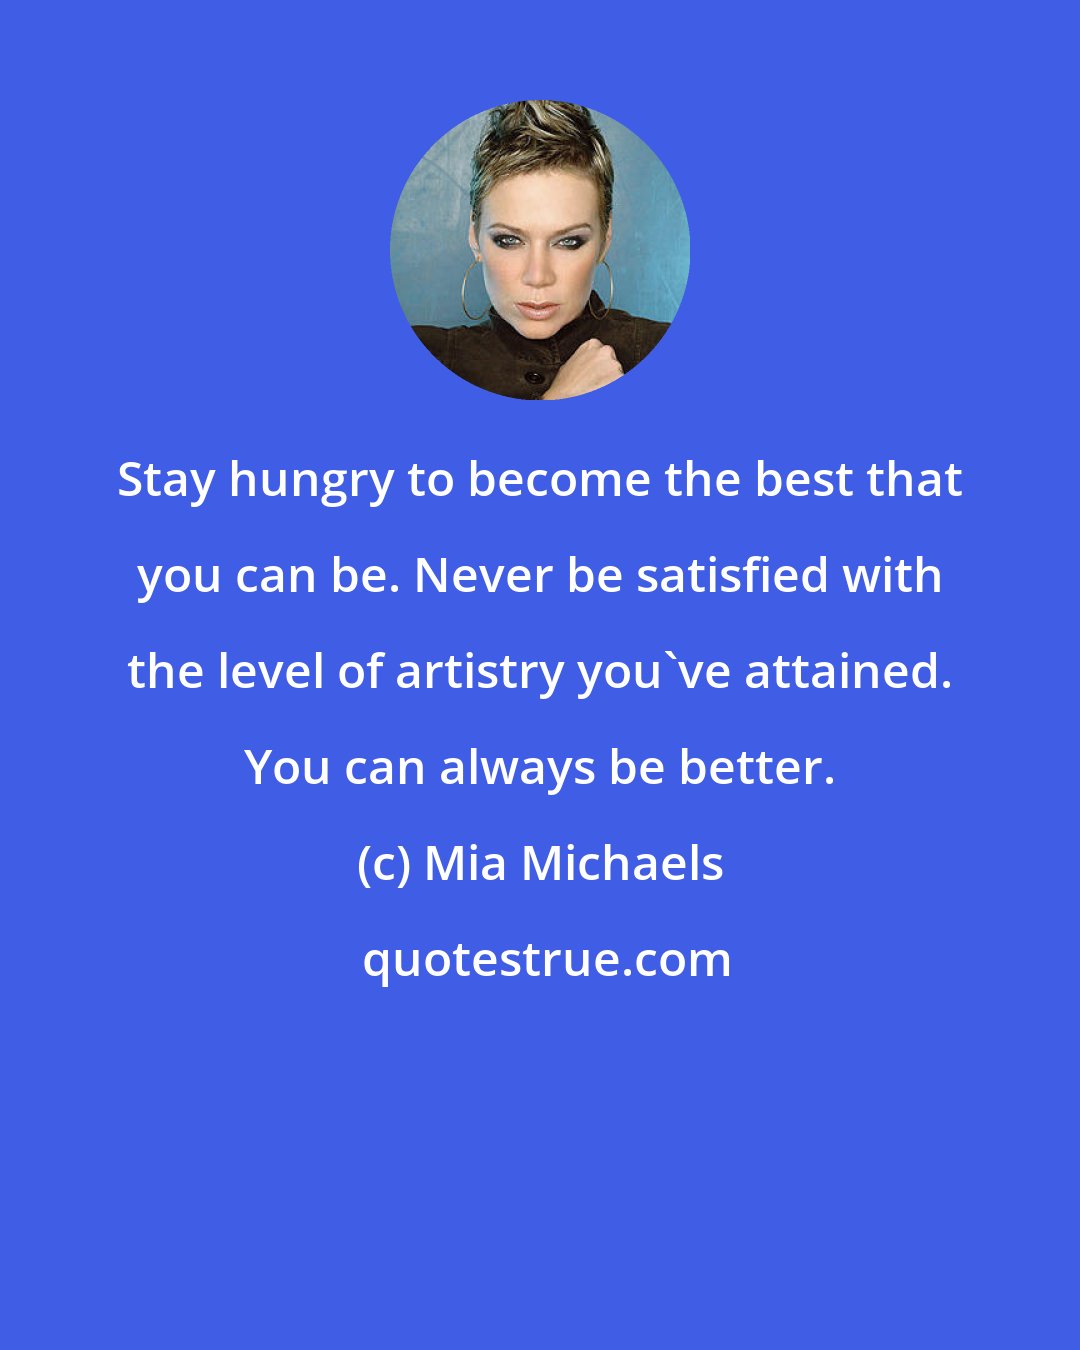 Mia Michaels: Stay hungry to become the best that you can be. Never be satisfied with the level of artistry you've attained. You can always be better.